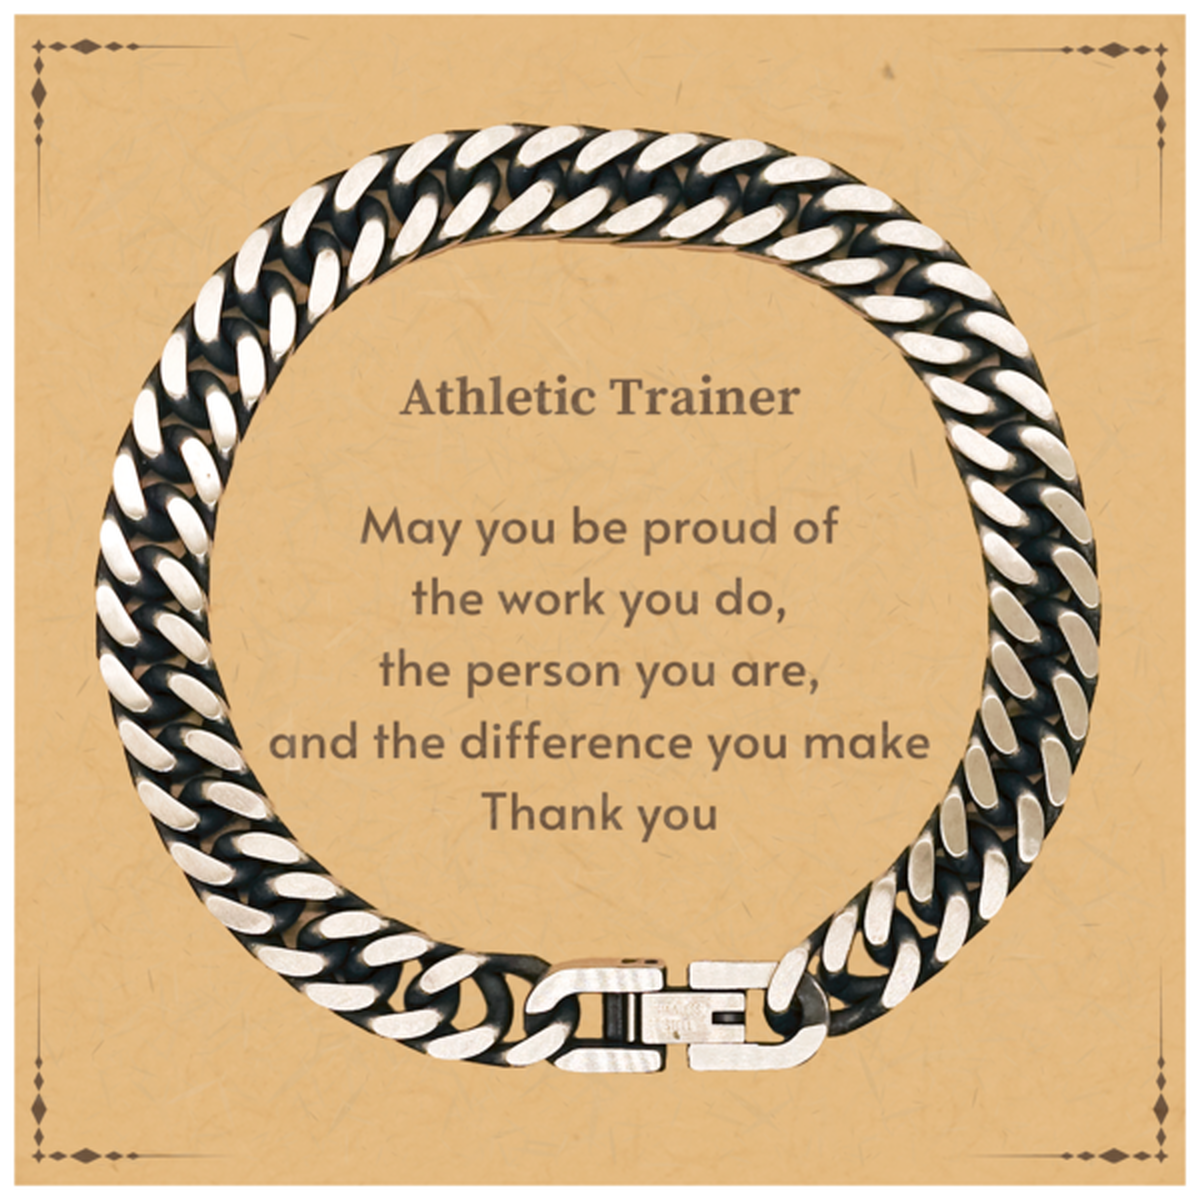 Heartwarming Cuban Link Chain Bracelet Retirement Coworkers Gifts for Athletic Trainer, Athletic Trainer May You be proud of the work you do, the person you are Gifts for Boss Men Women Friends